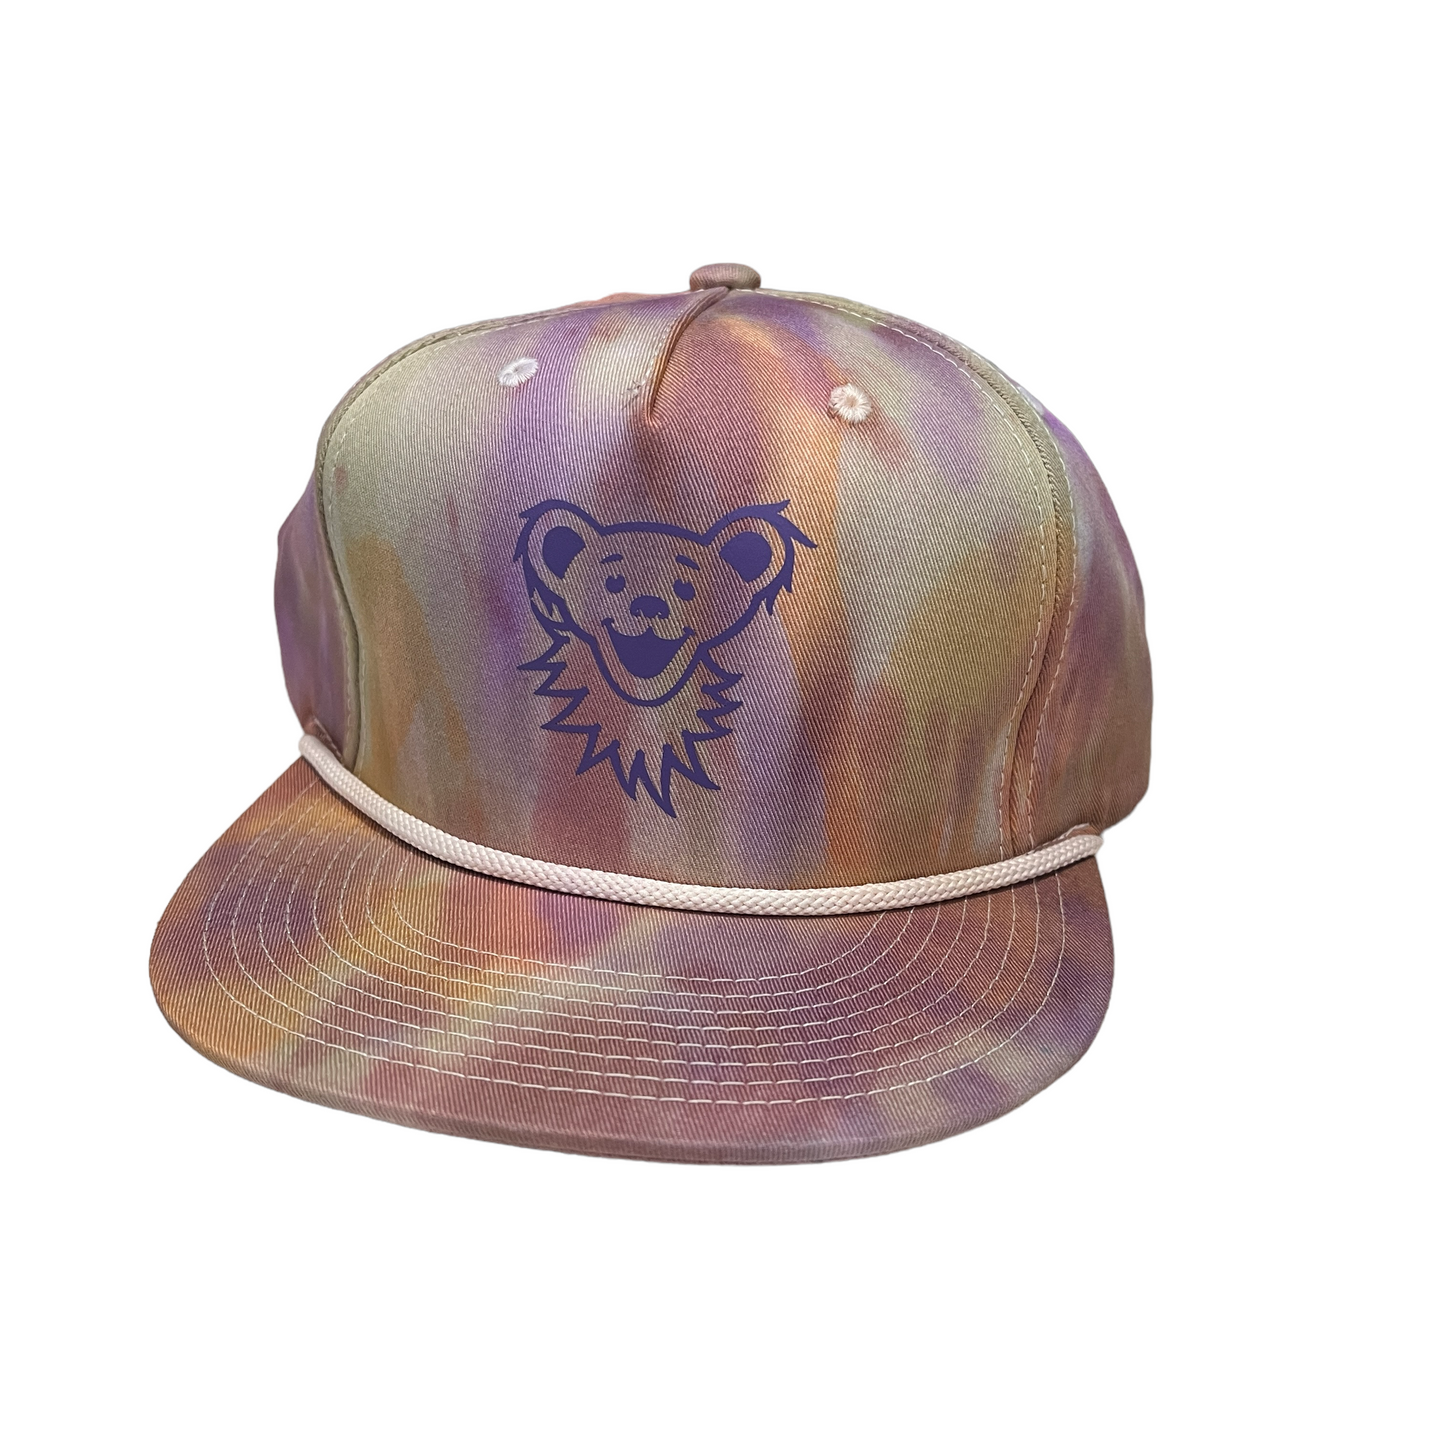 Hand dyed hat - Bear